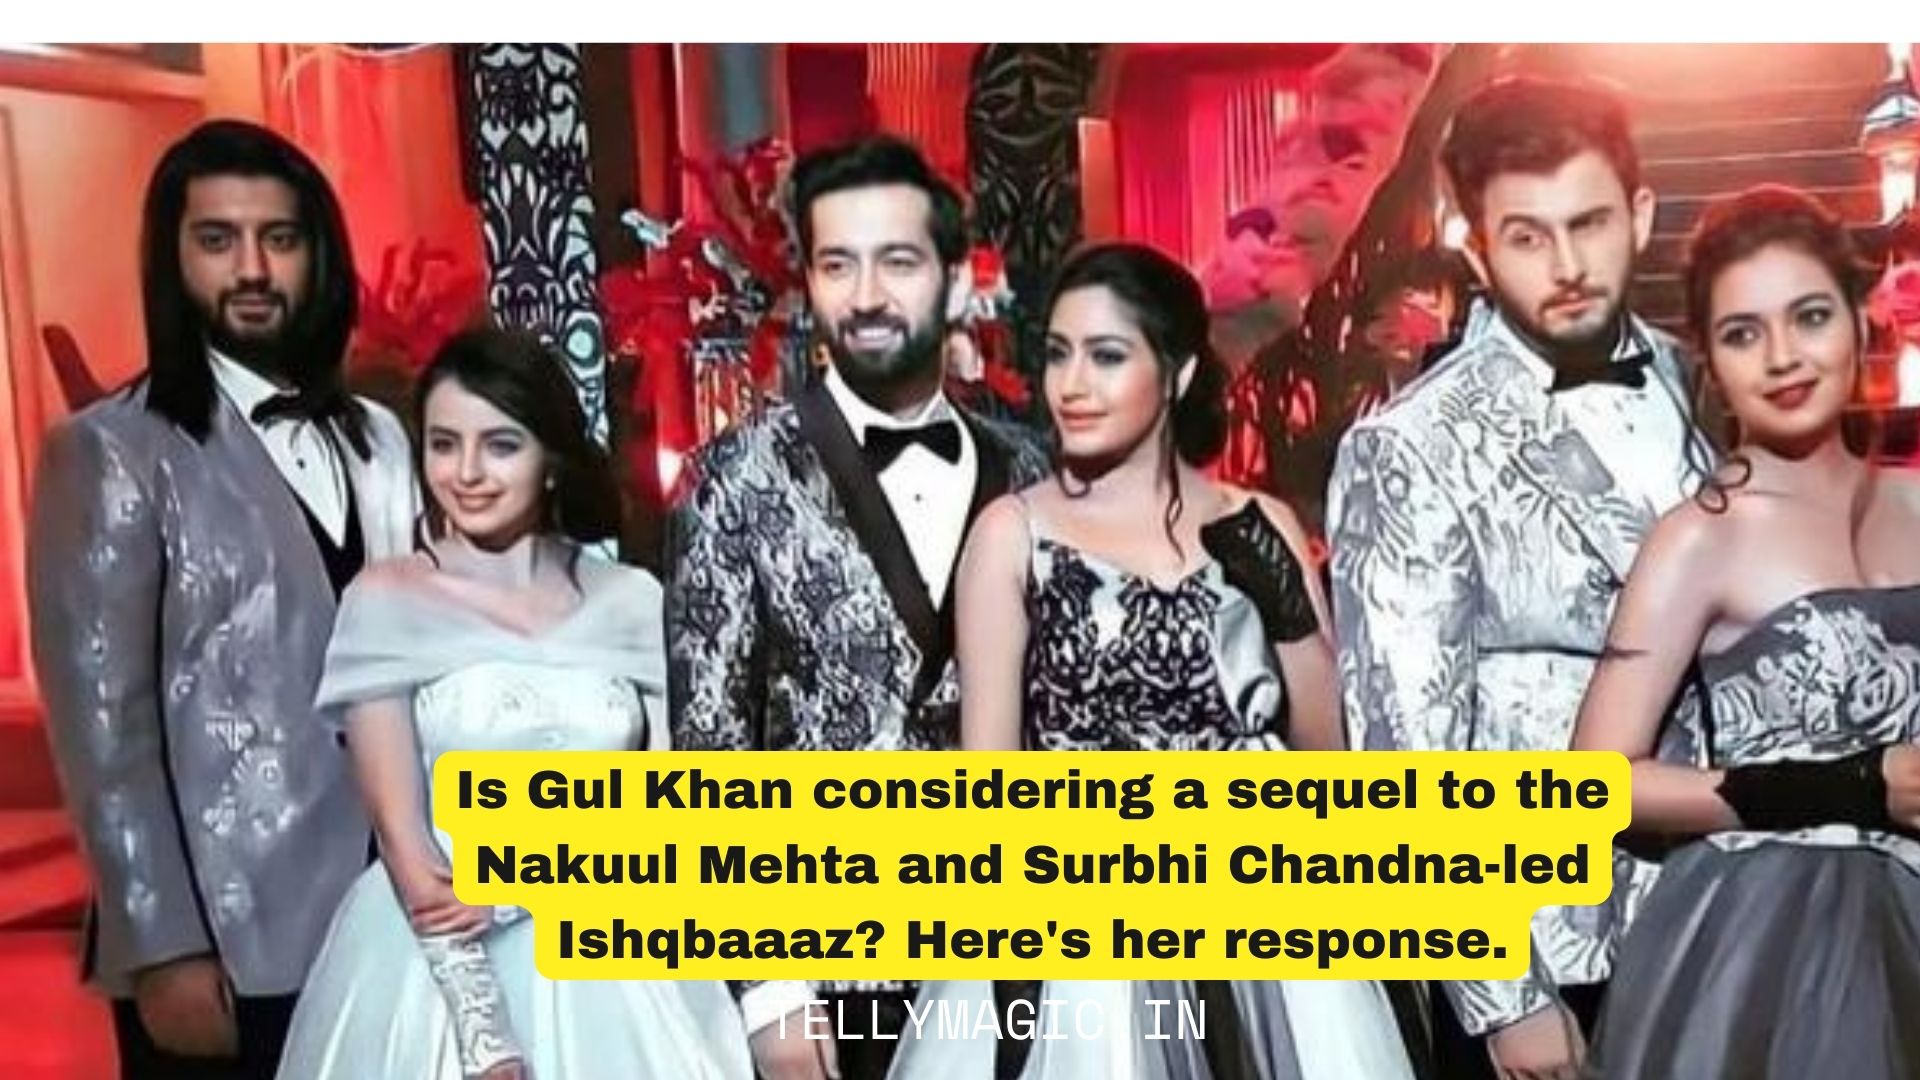 Is Gul Khan considering a sequel to the Nakuul Mehta and Surbhi Chandna-led Ishqbaaaz? Here's her response.